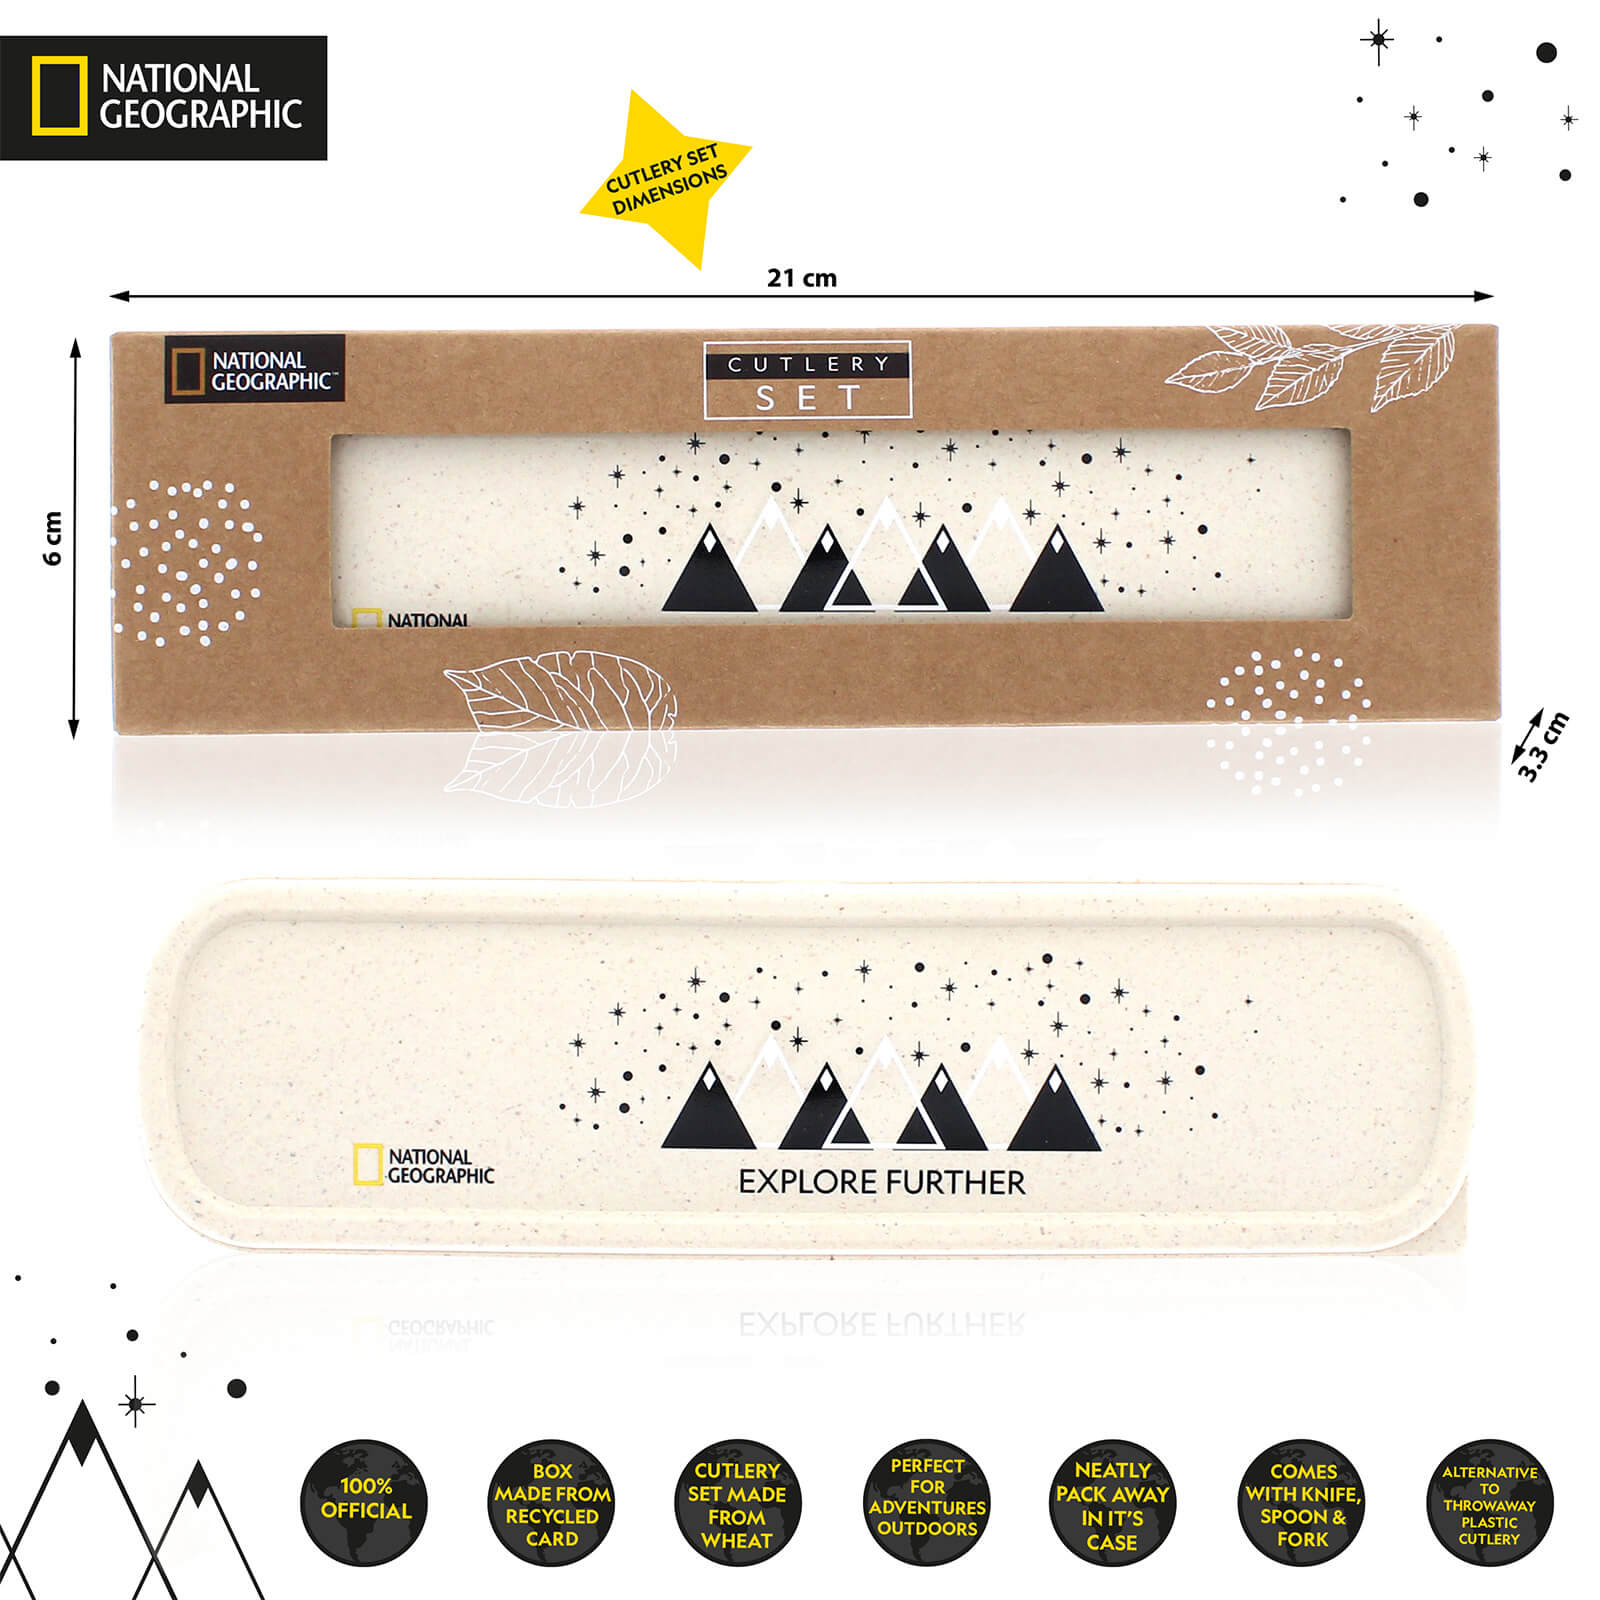 National Geographic Cutlery Set